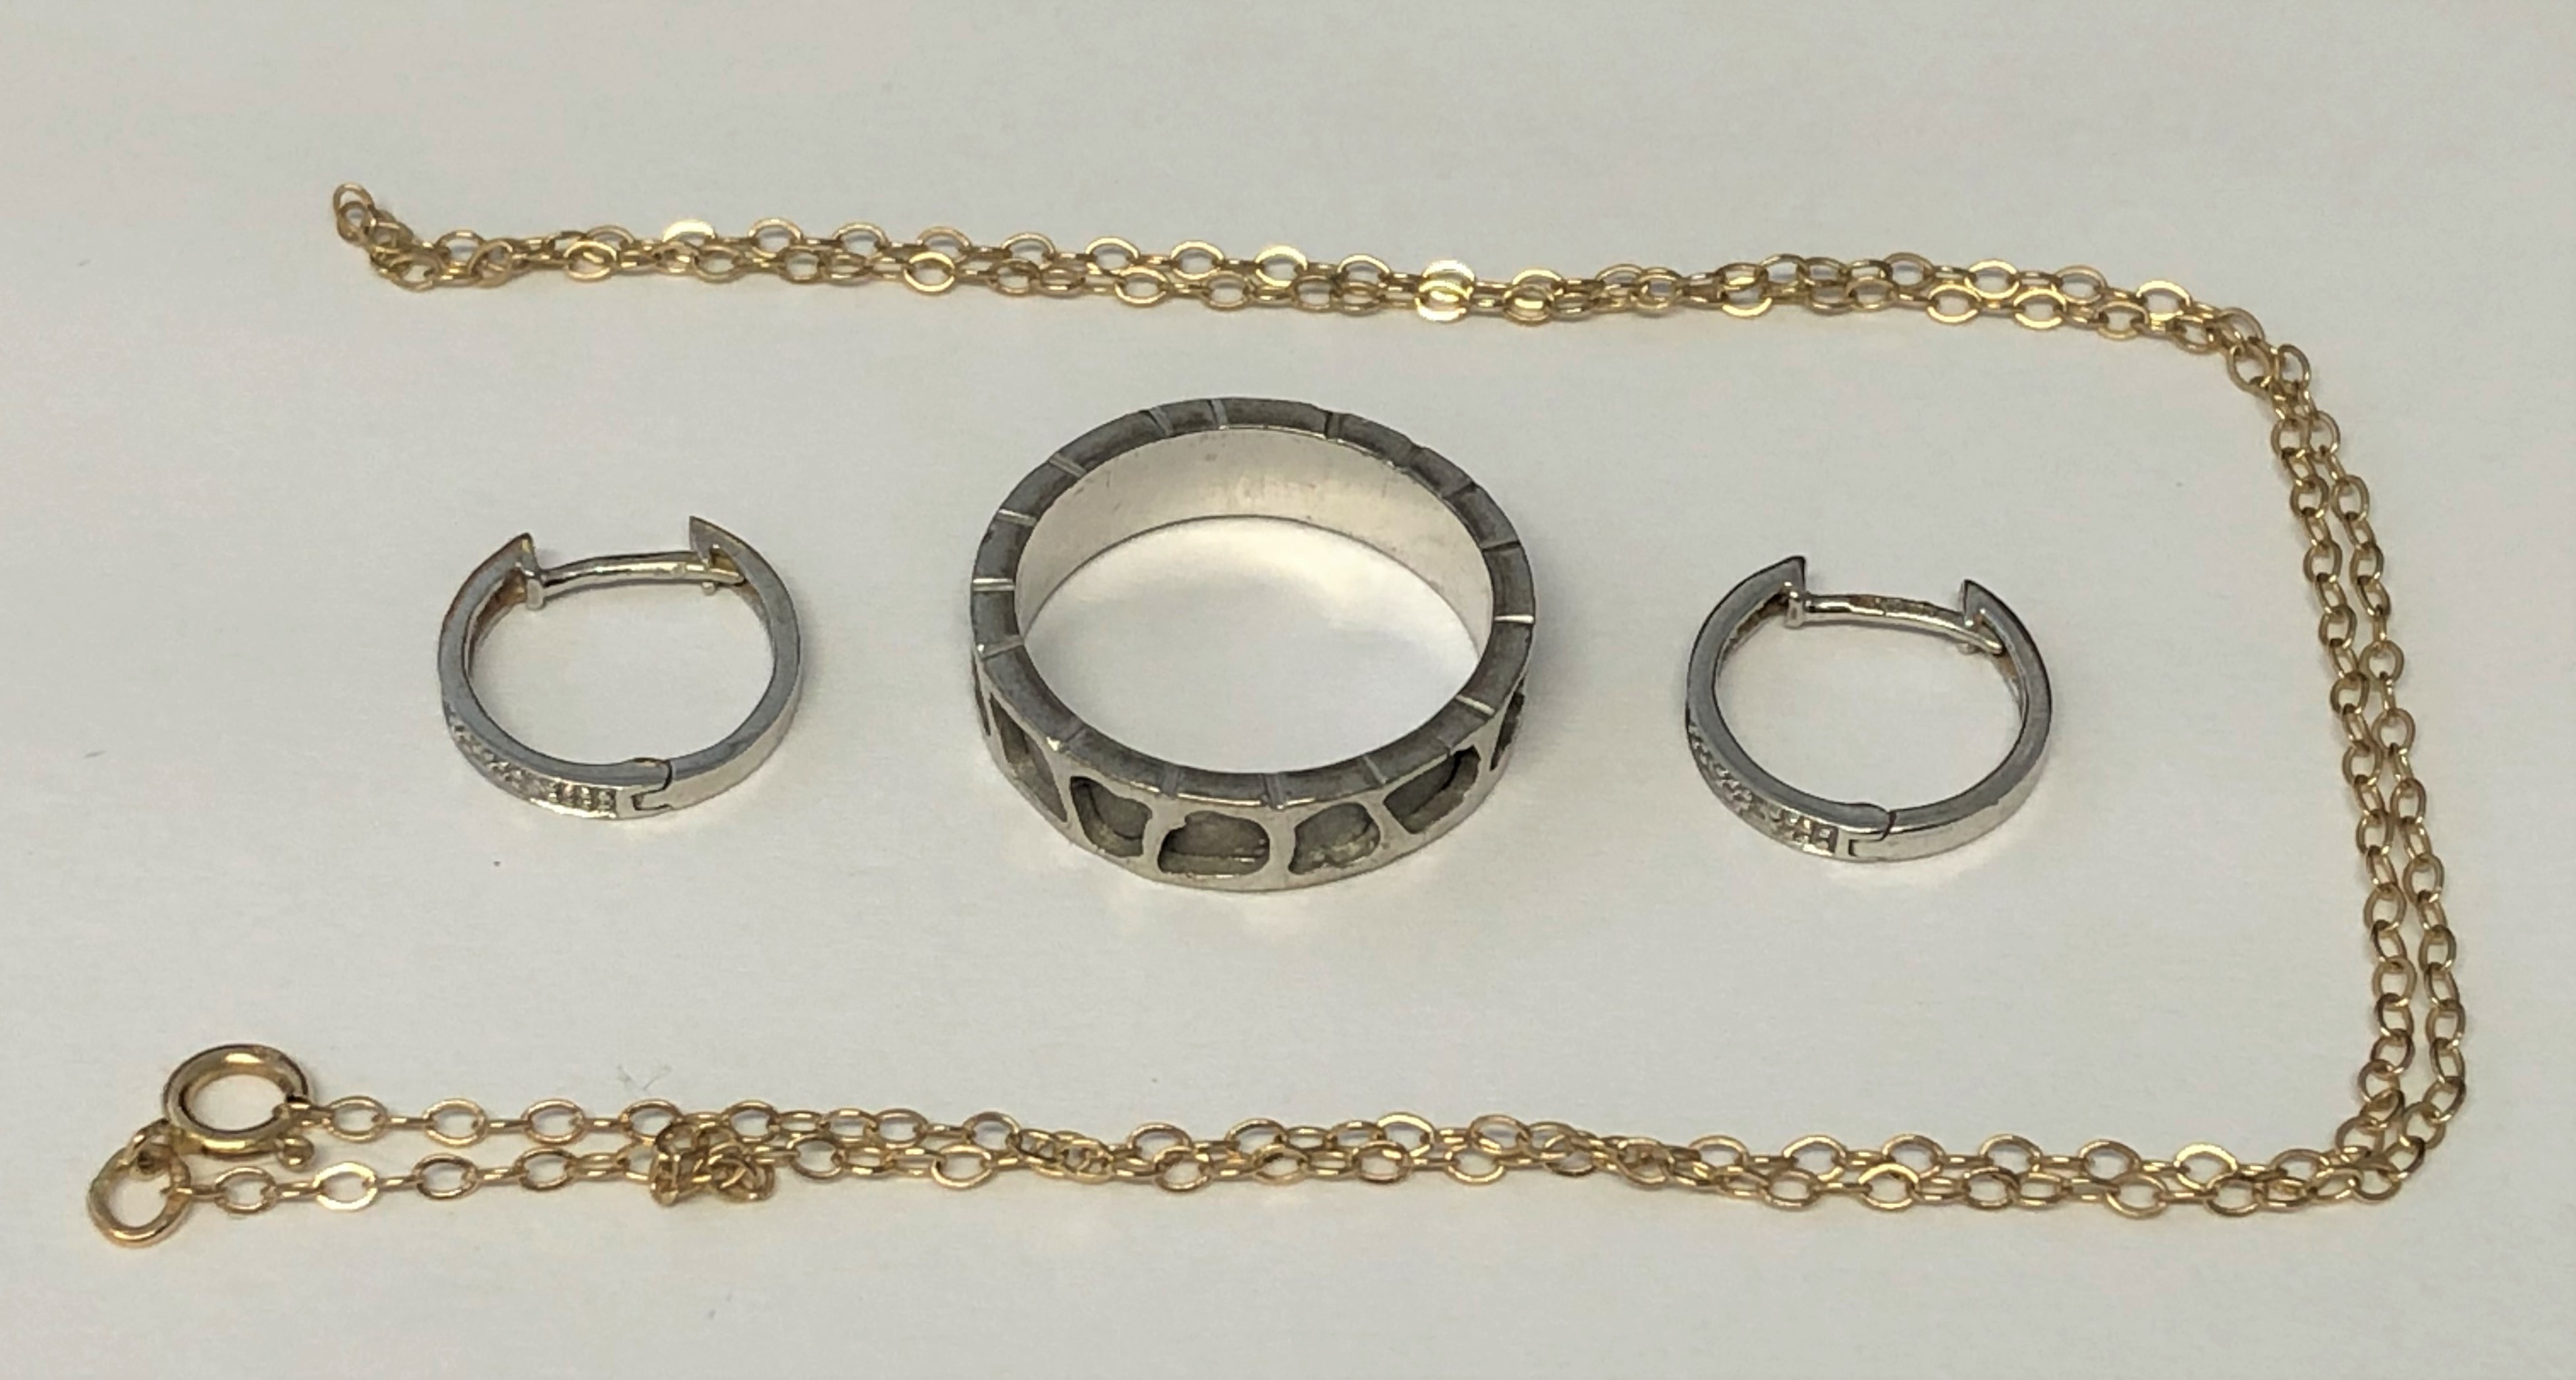 18CT WHITE GOLD BAND 4.4G APPROX A 9CT GOLD TRACE CHAIN AND 9CT WHITE GOLD HALF HOOP EARRINGS1.